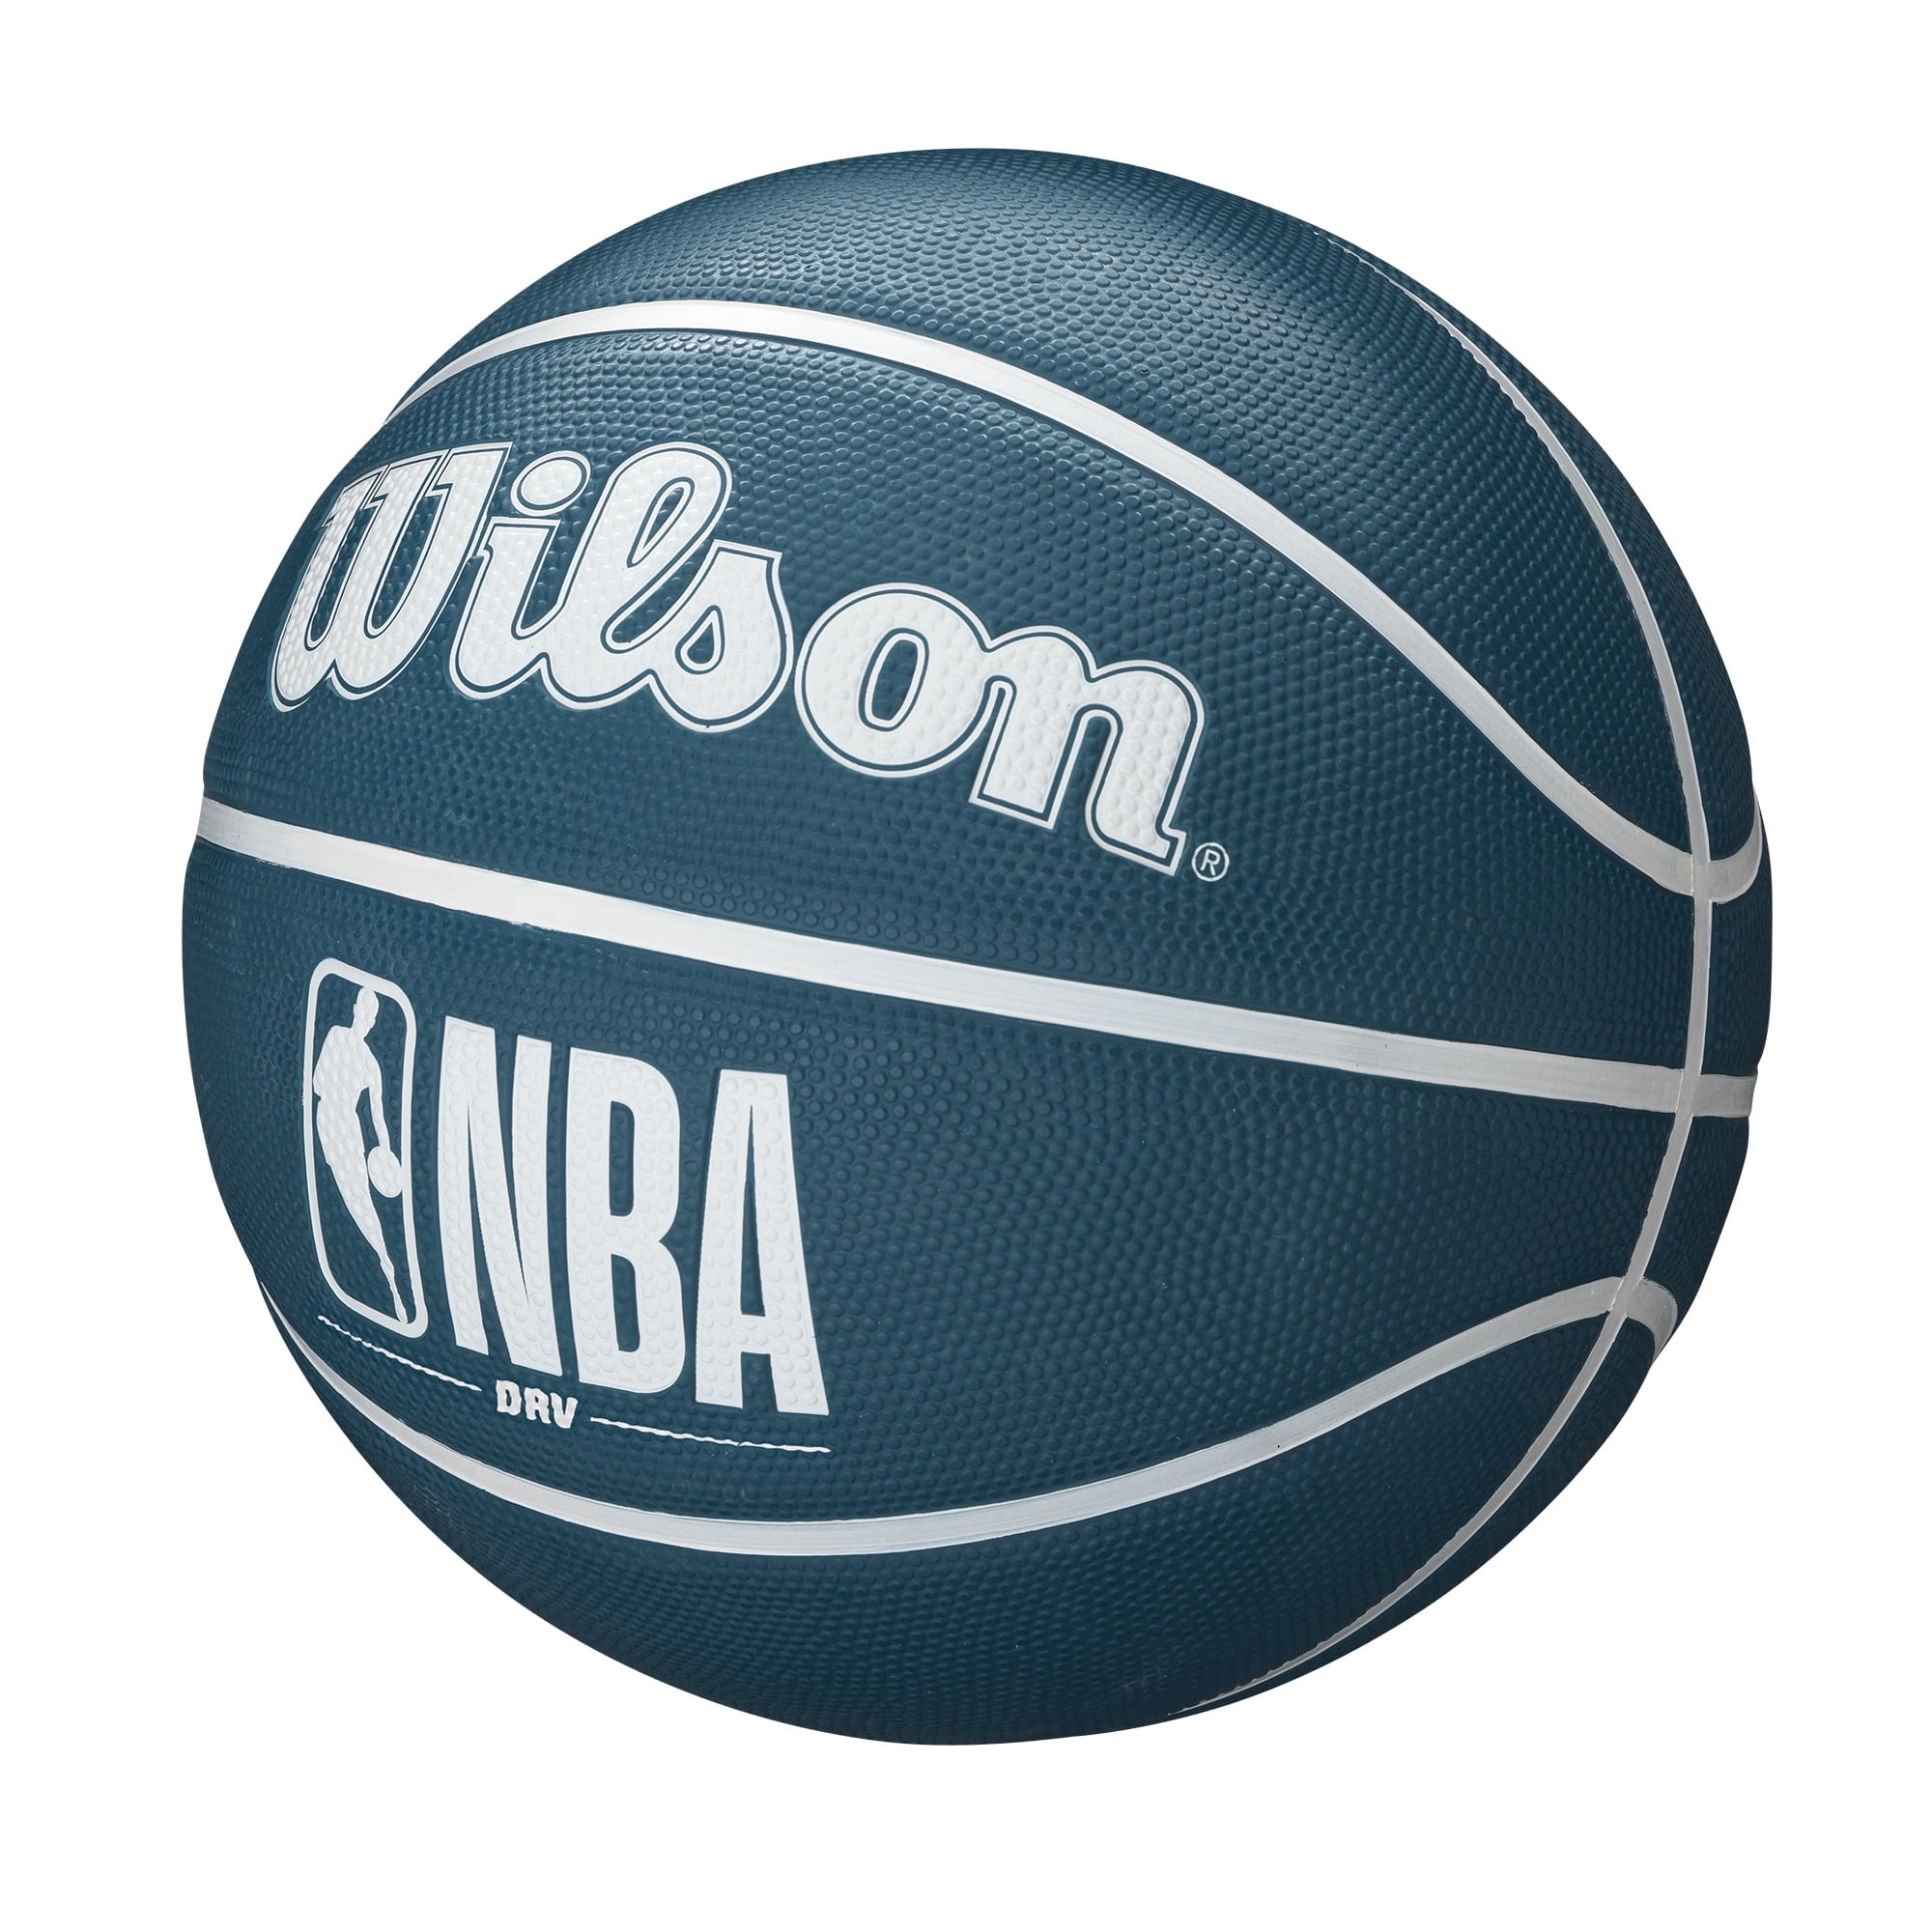 Buy Wilson Sporting Goods NBA All Team Red, White & Blue Basketball - 29 5  Online at Low Prices in India 